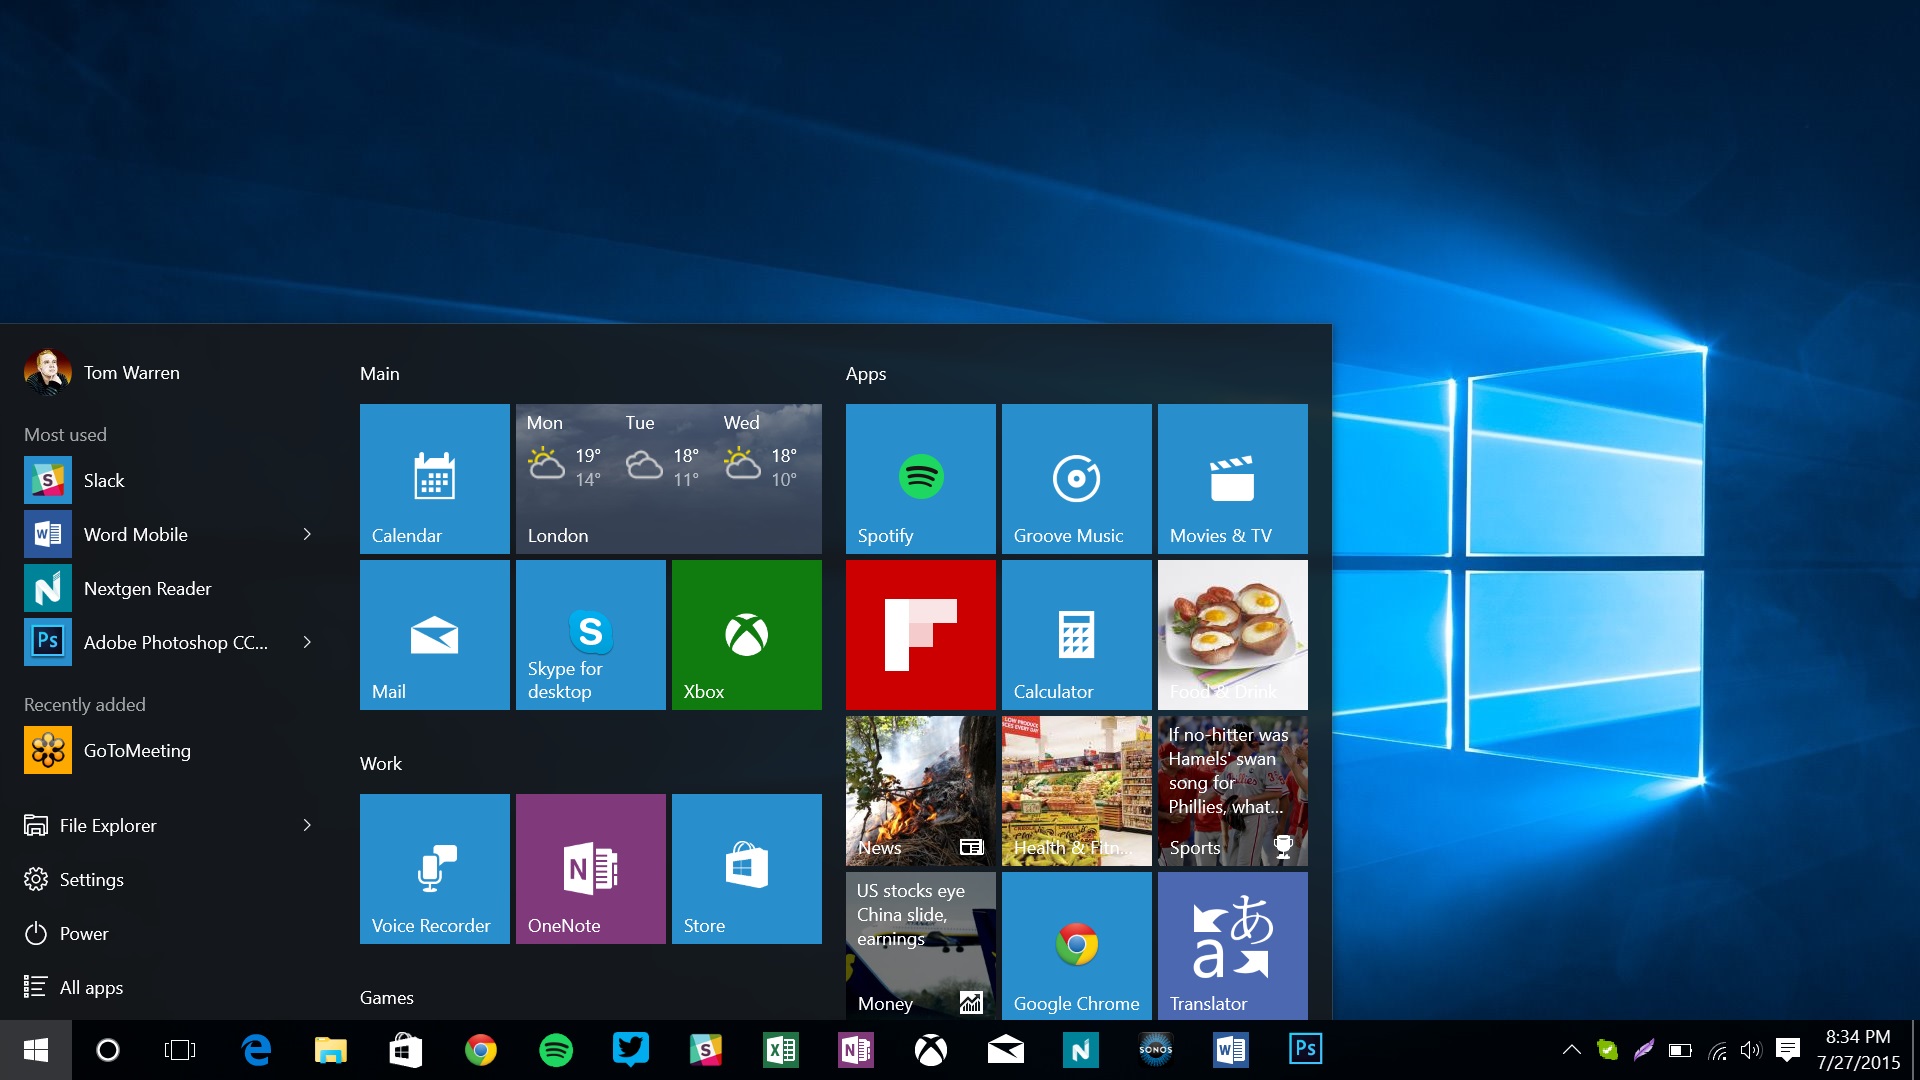 Google image from http://www.theverge.com/2015/7/28/9045331/microsoft-windows-10-review